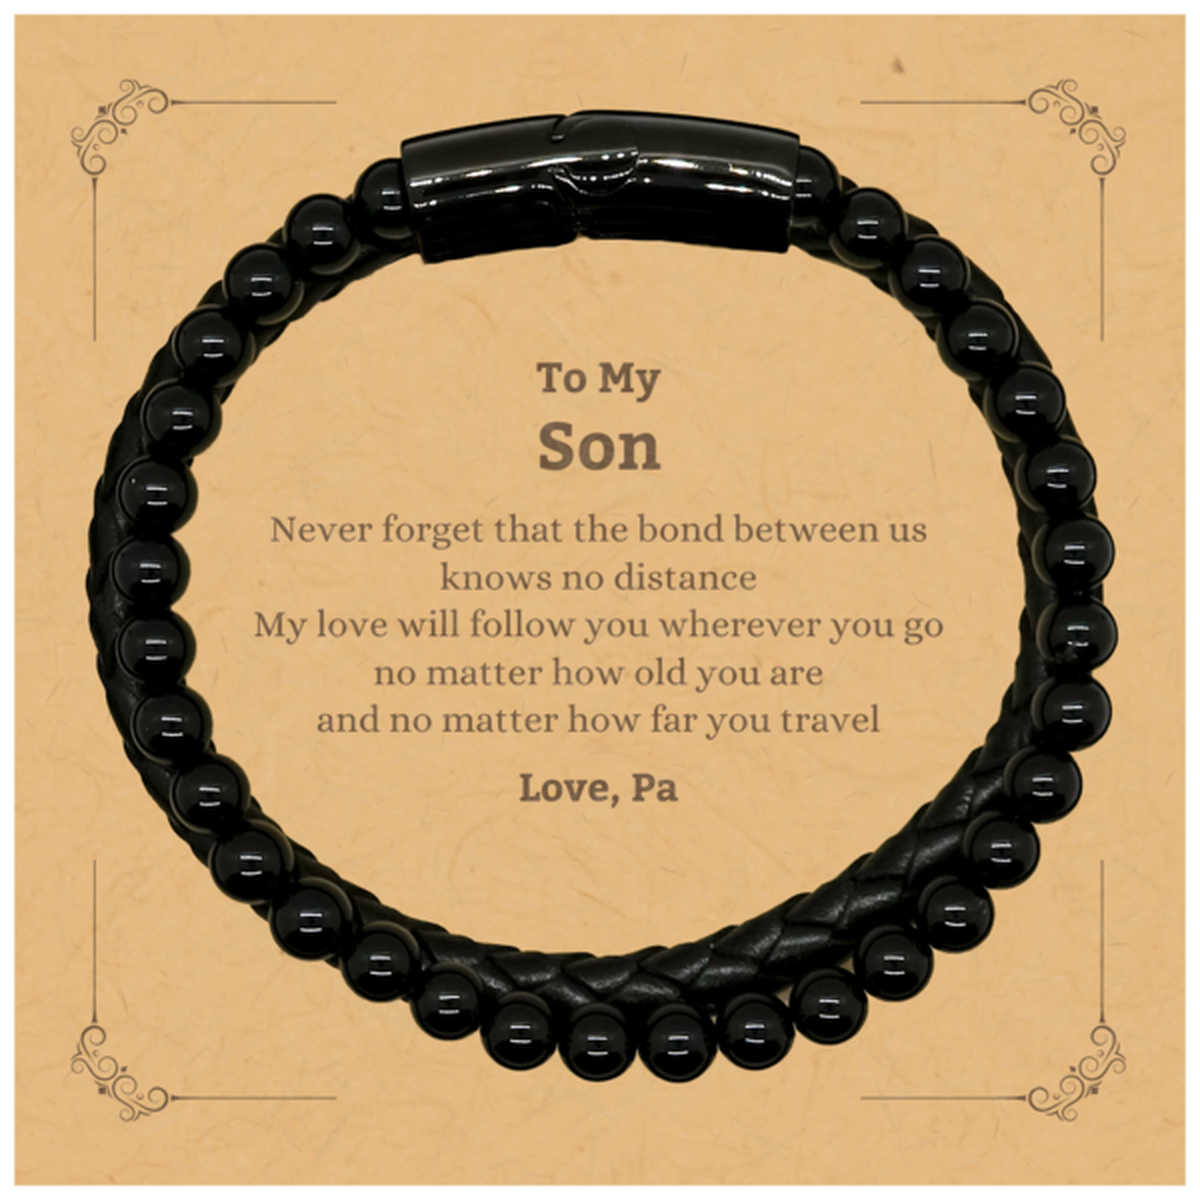 Son Birthday Gifts from Pa, Adjustable Stone Leather Bracelets for Son Christmas Graduation Unique Gifts Son Never forget that the bond between us knows no distance. Love, Pa